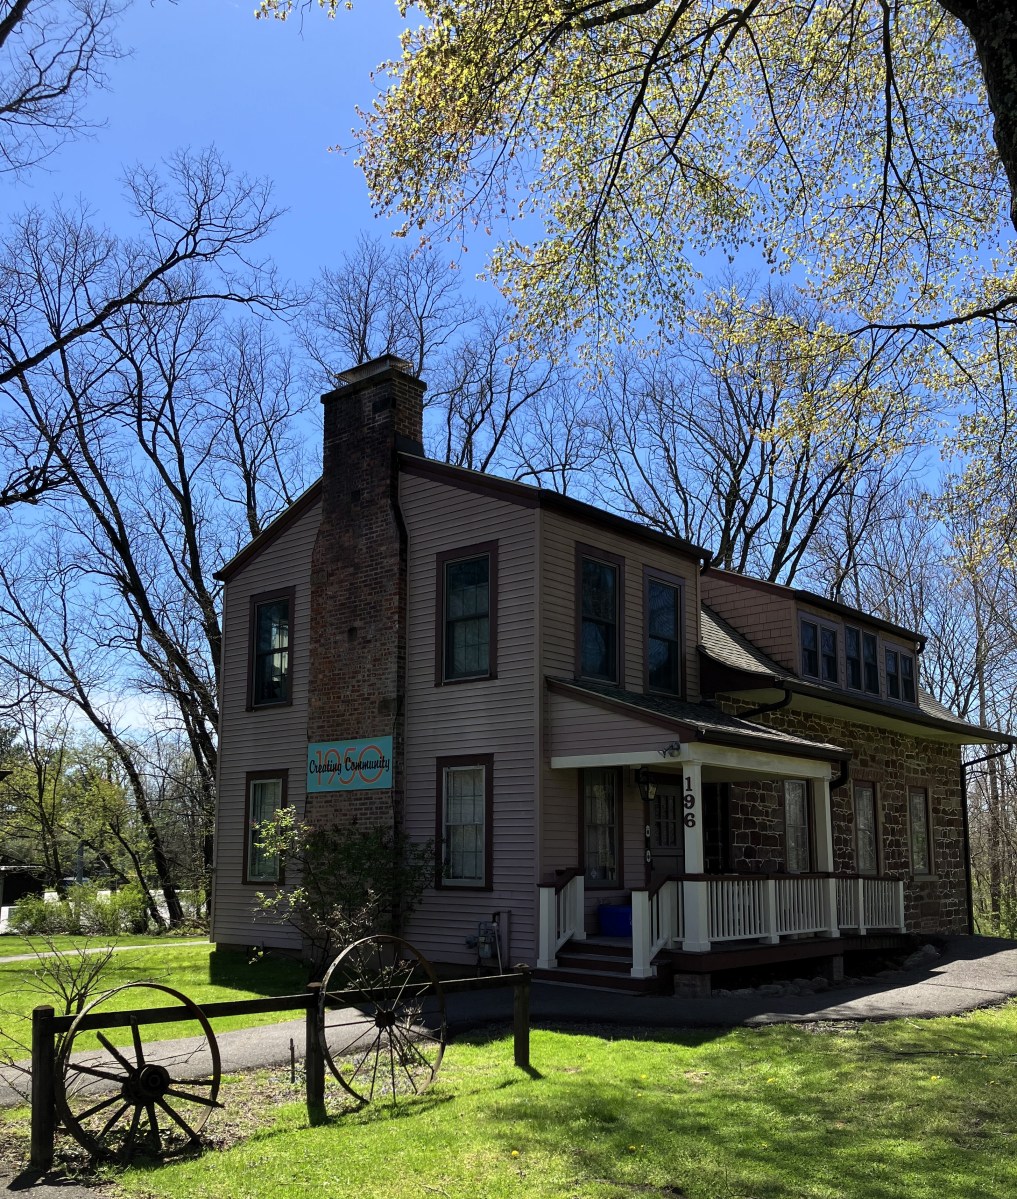 Depew House with Creating Community Banner